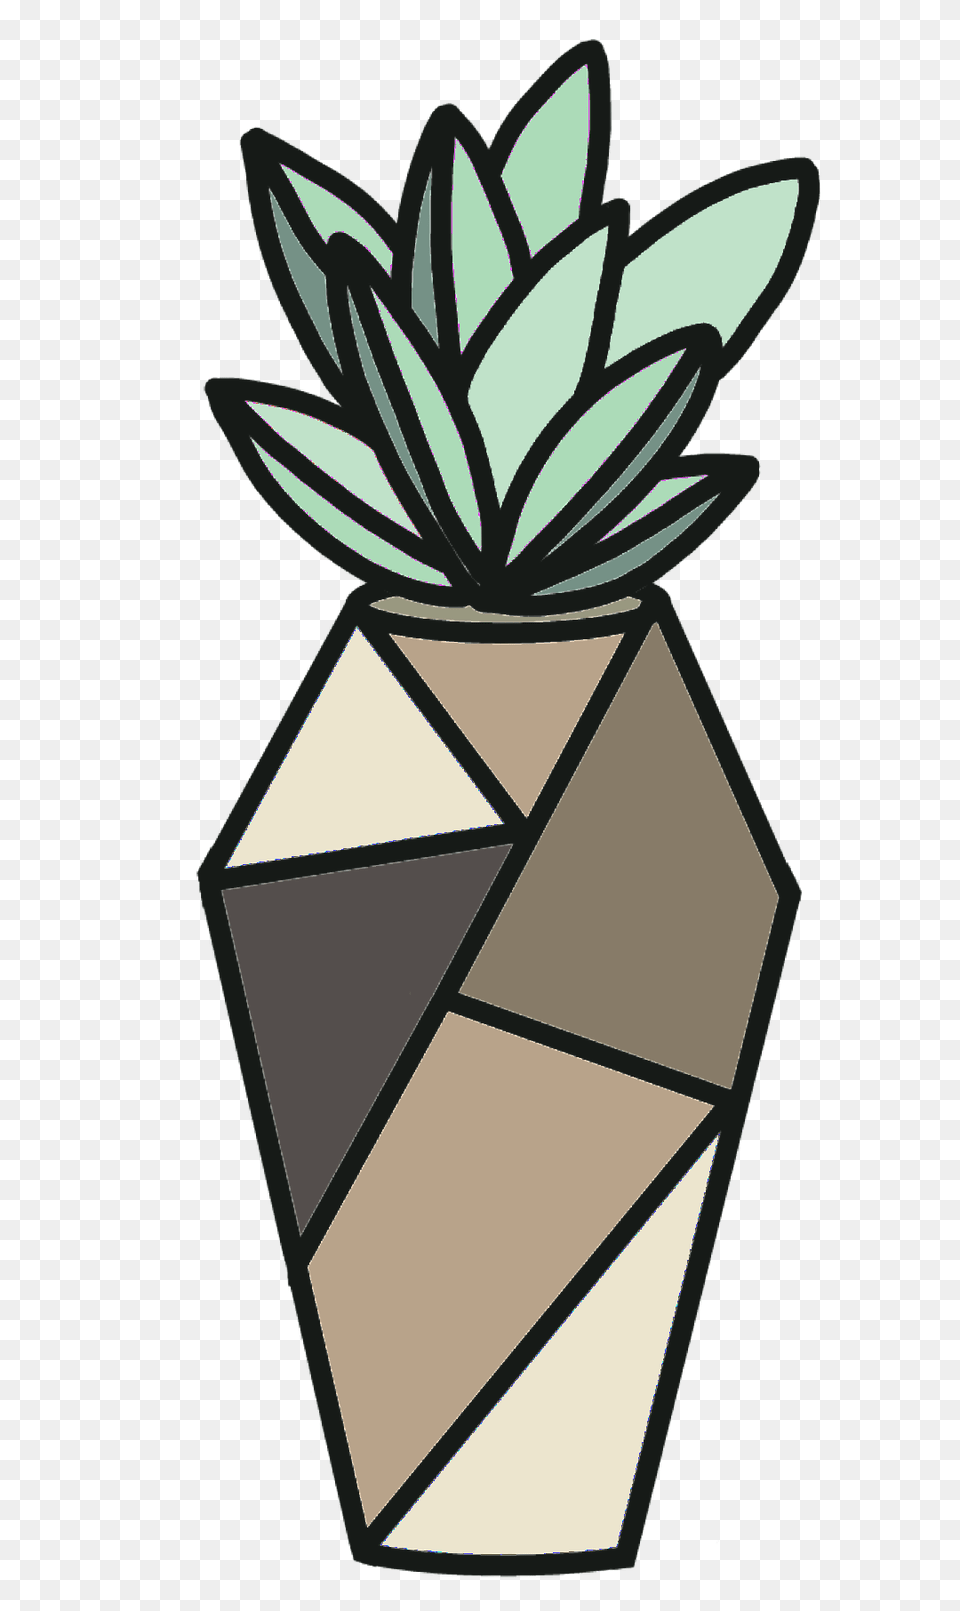 Popular And Trending Terrarium Stickers, Vase, Pottery, Potted Plant, Planter Png Image